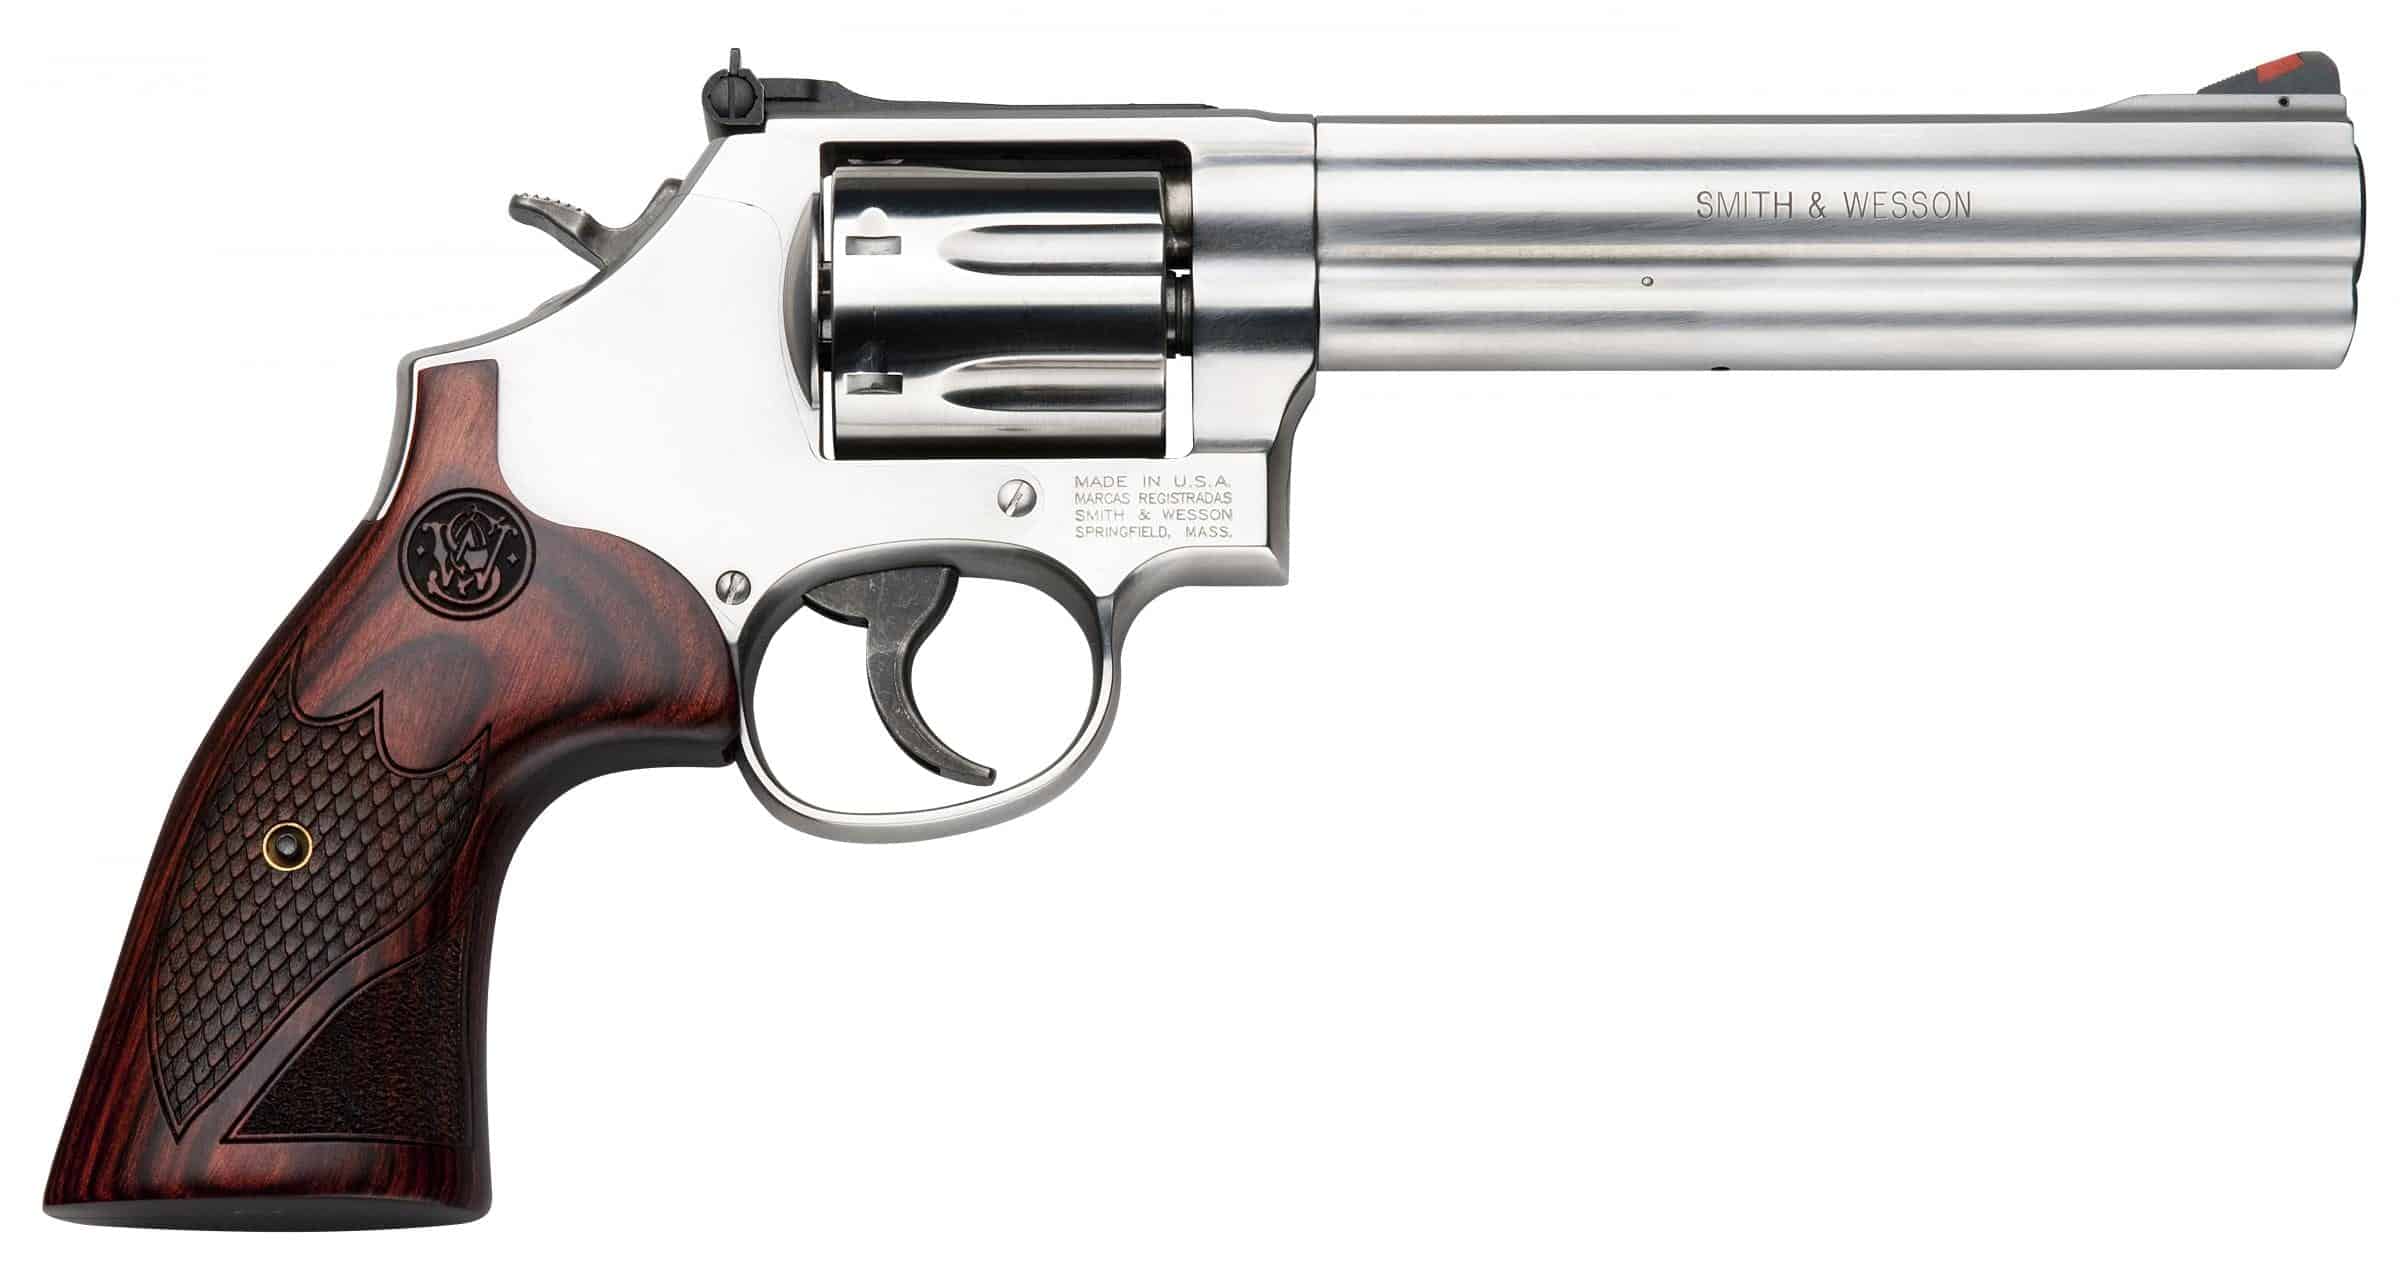 Smith & Wesson Model 686 Plus Deluxe 357 Magnum Revolver, Wood 